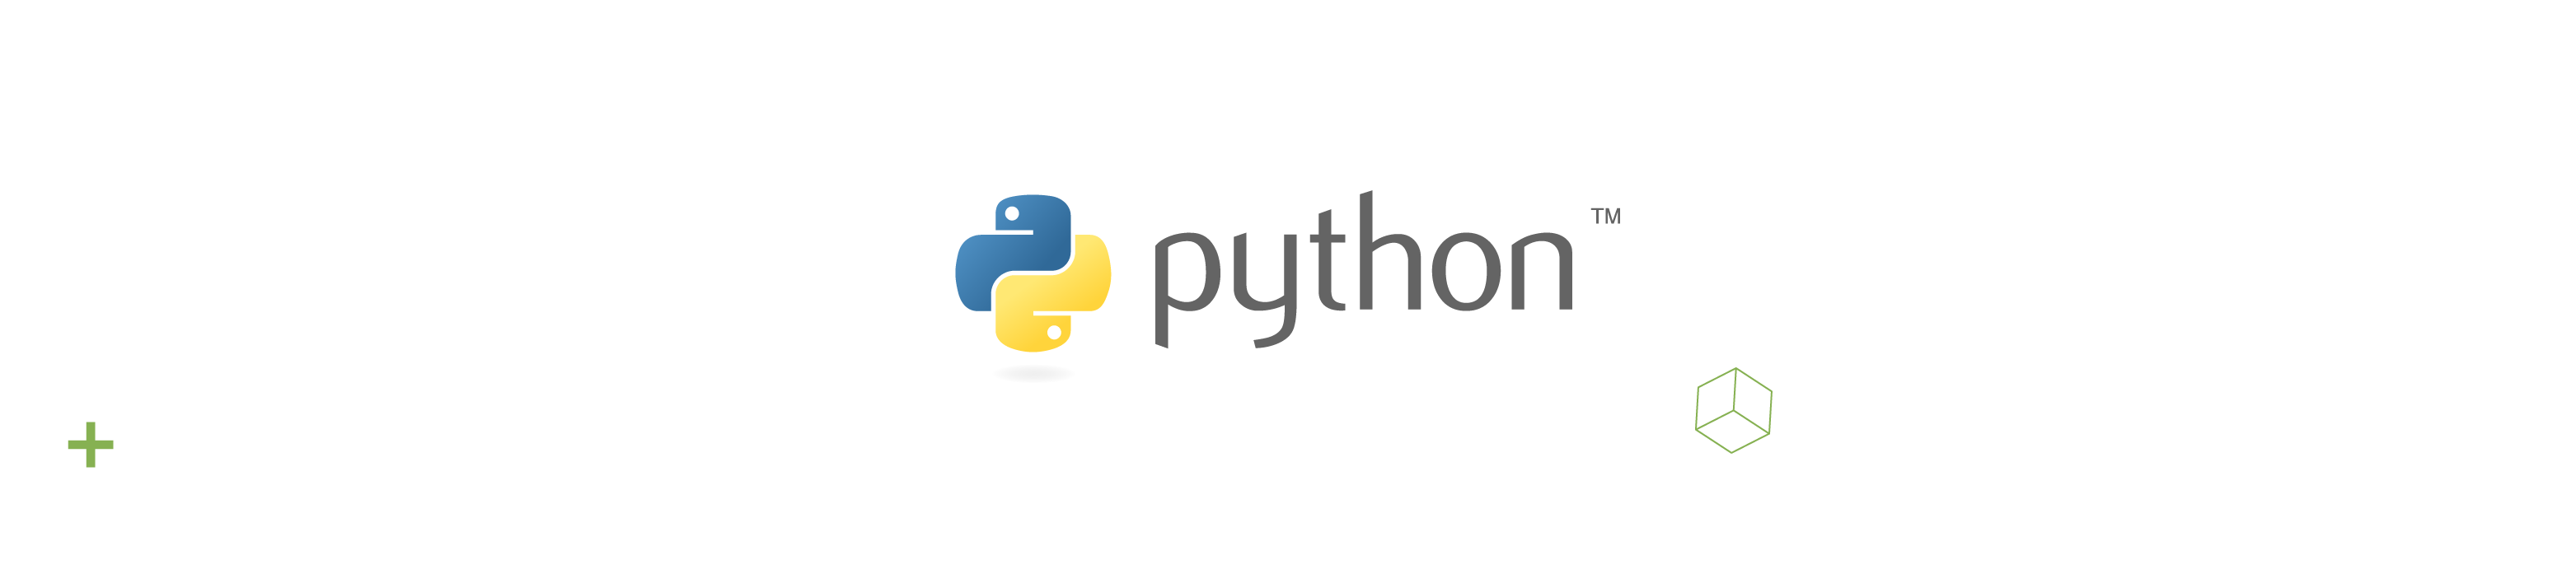 Python - The Best Language for Startup Programming 3